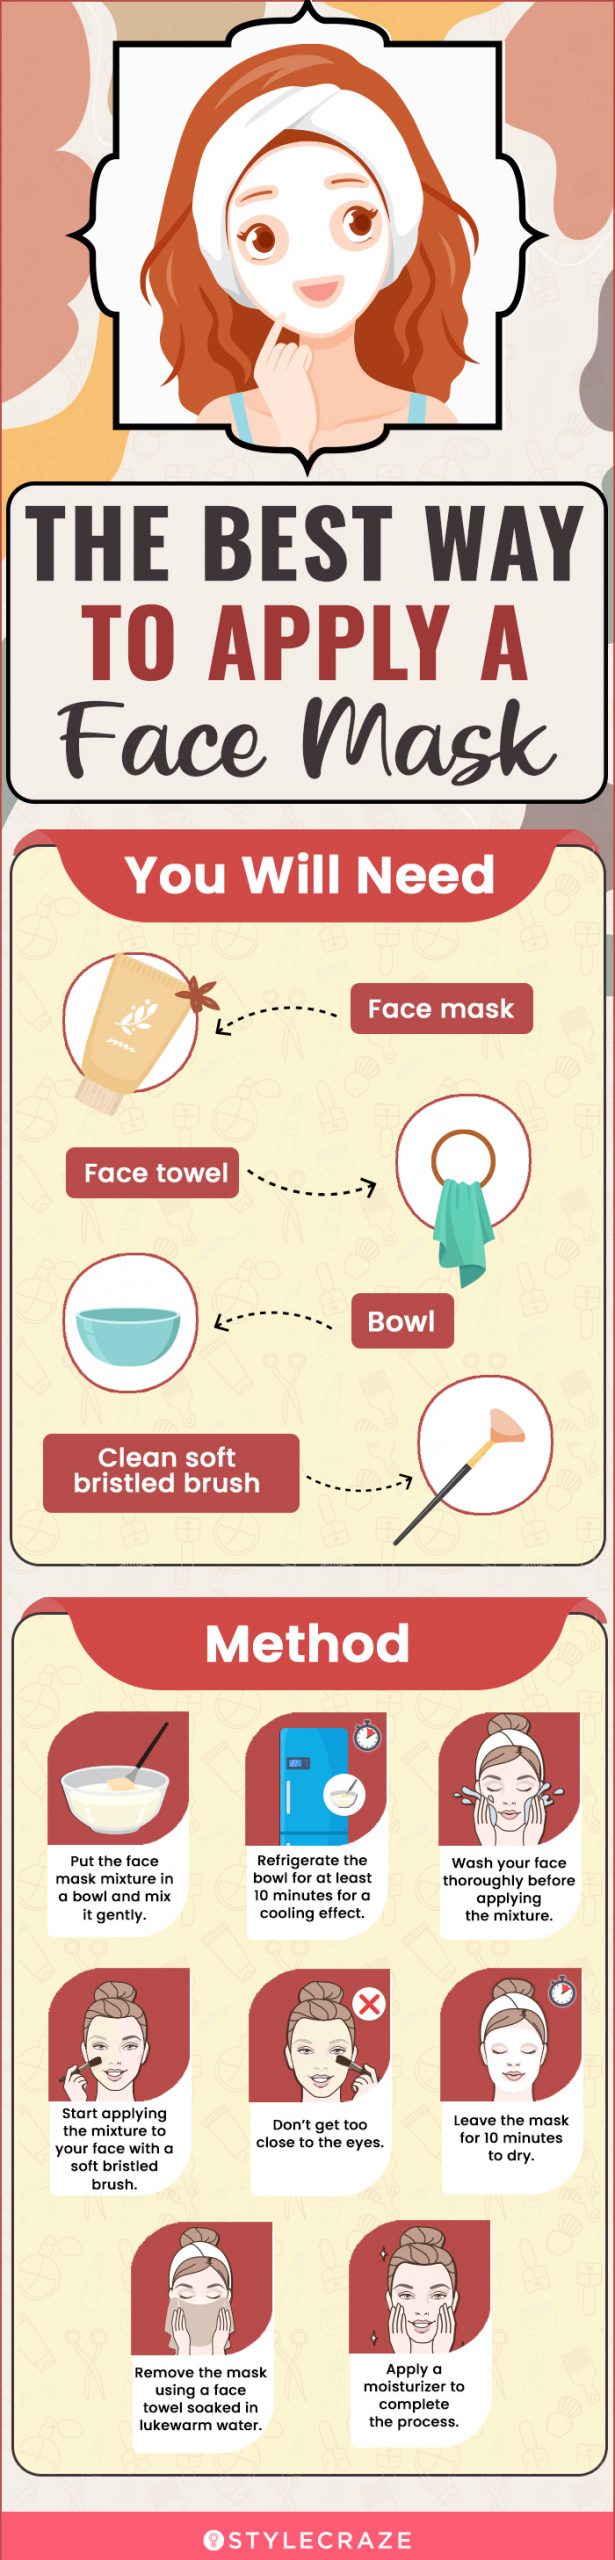 The Best Way To Apply A Face Mask (infographic)